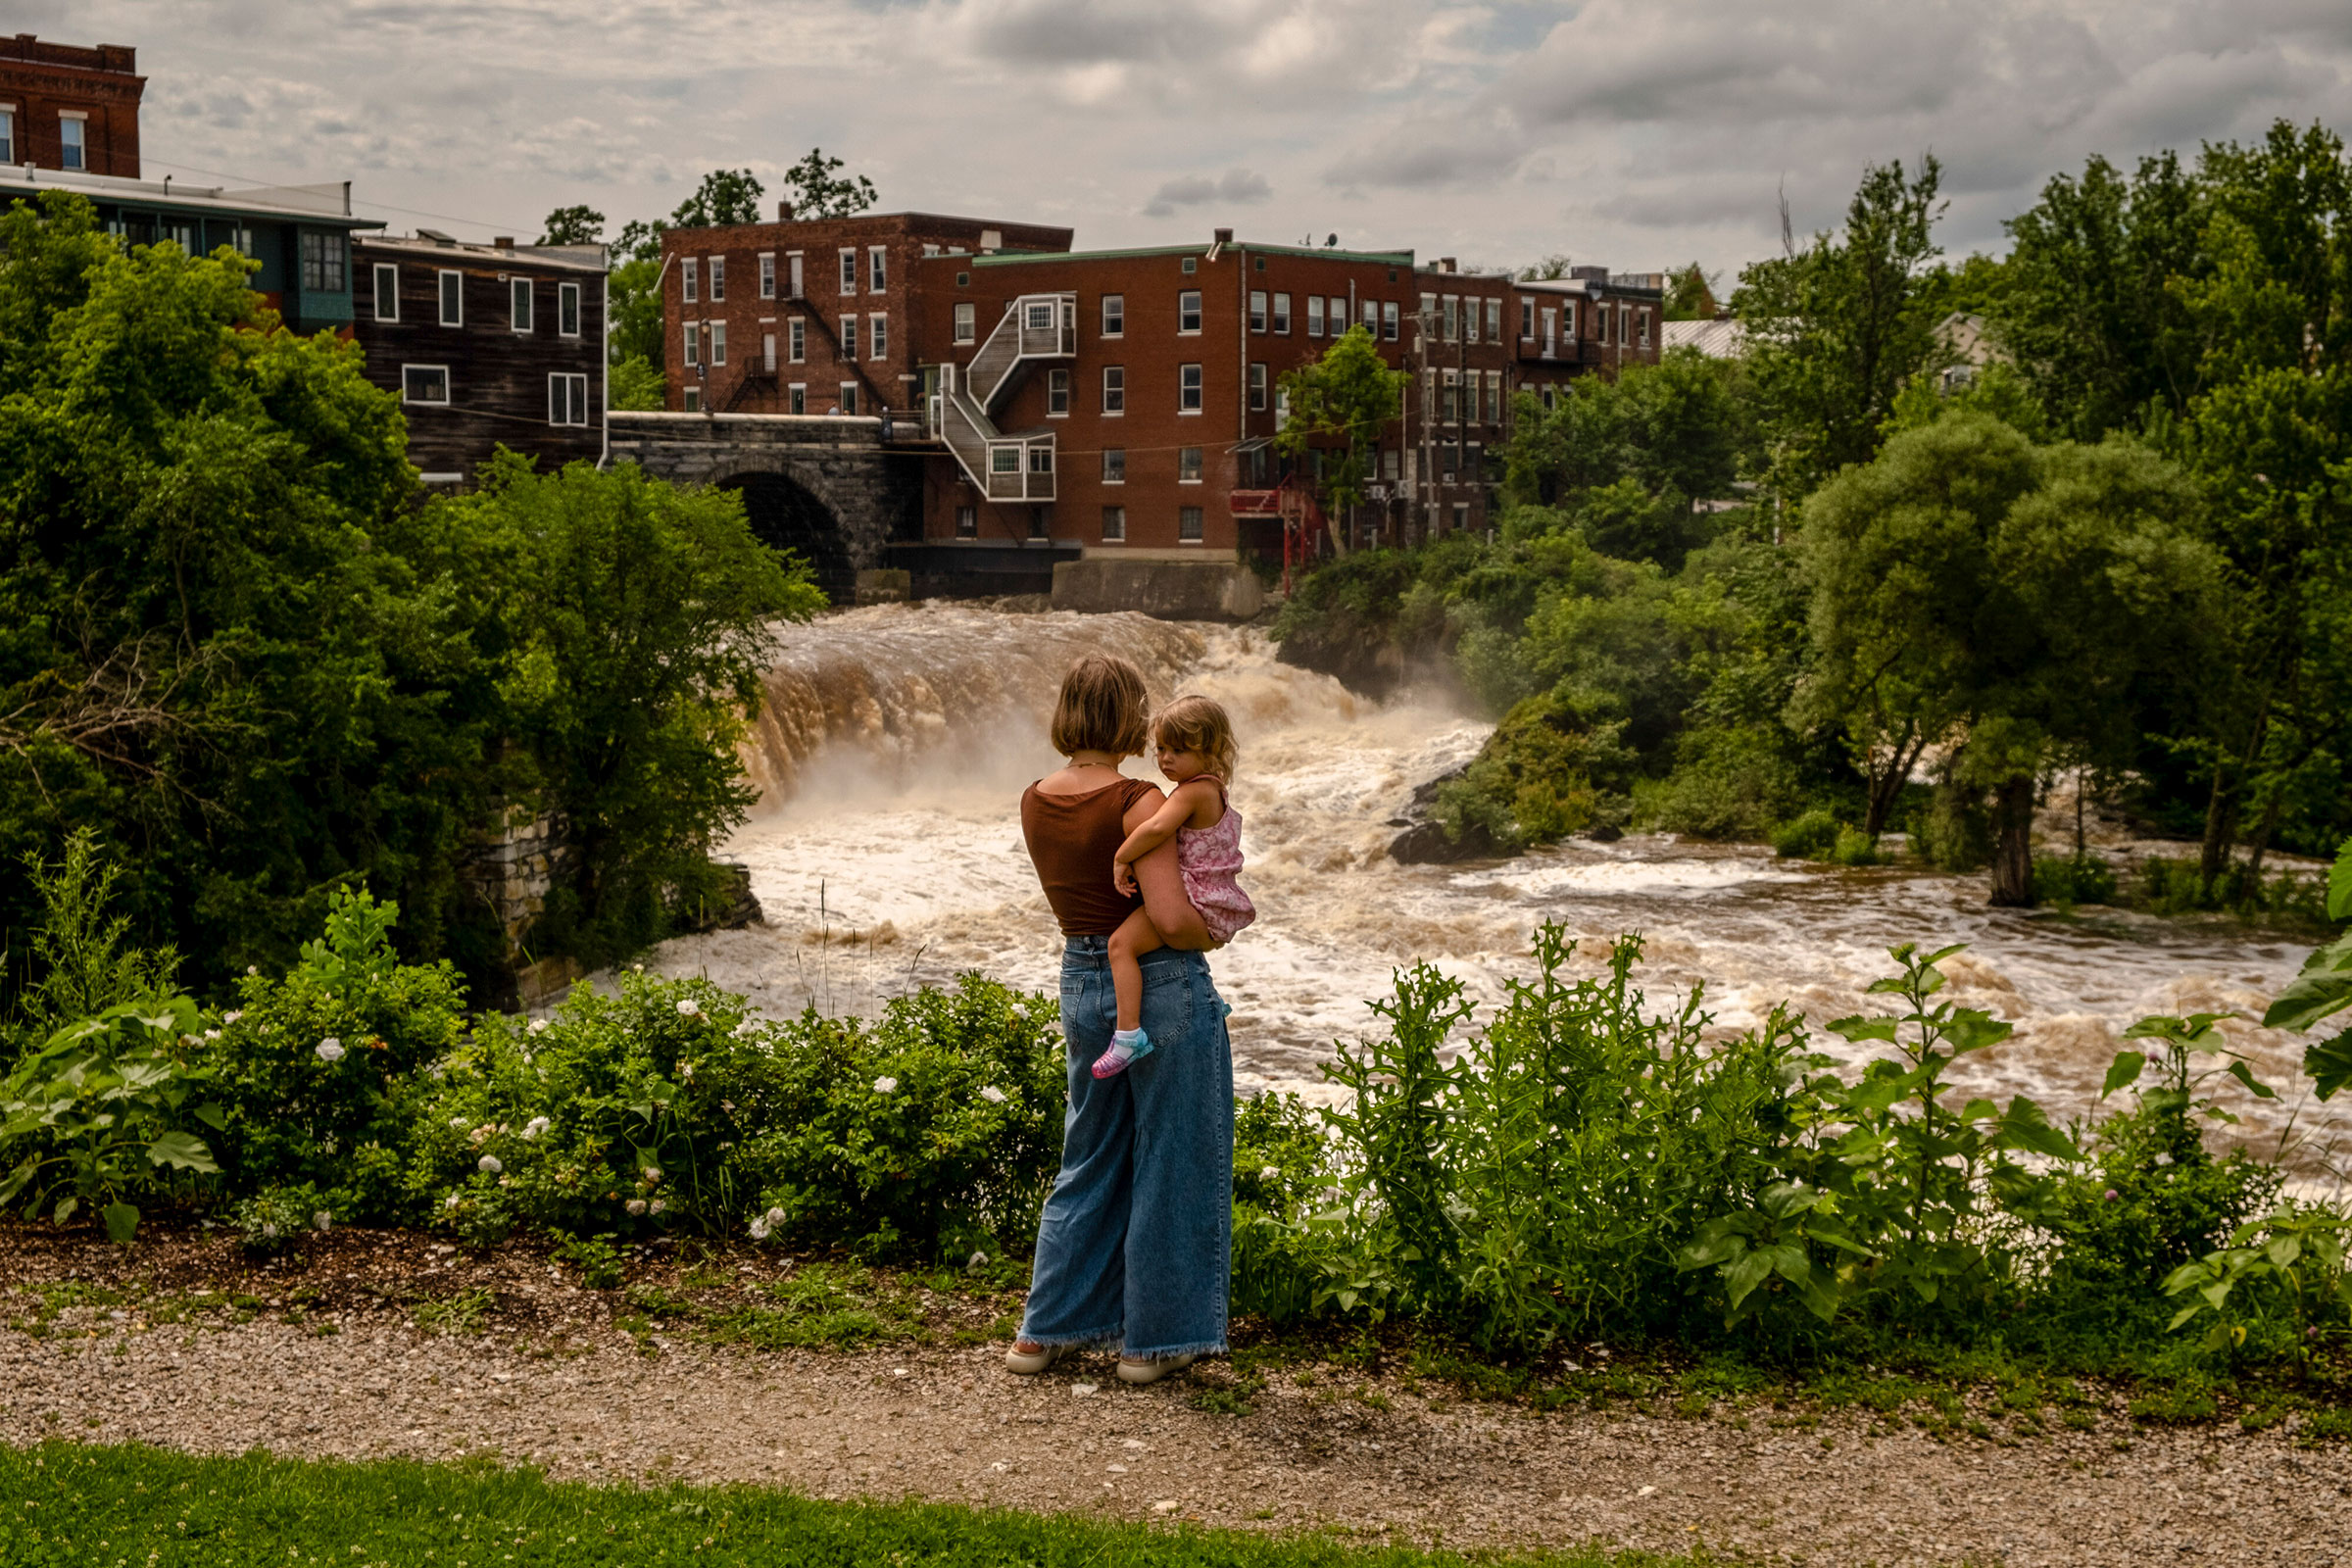 Lauren Rowley and her daughter Ursula, 2, look at the surging Otter Creek River in downtown Middlebury, Vt., on July 14, 2023. Vermont began new flood protection efforts after being battered by Tropical Storm Irene in 2011. Many appeared to be effective, but experts say more will be needed as storms become more extreme.